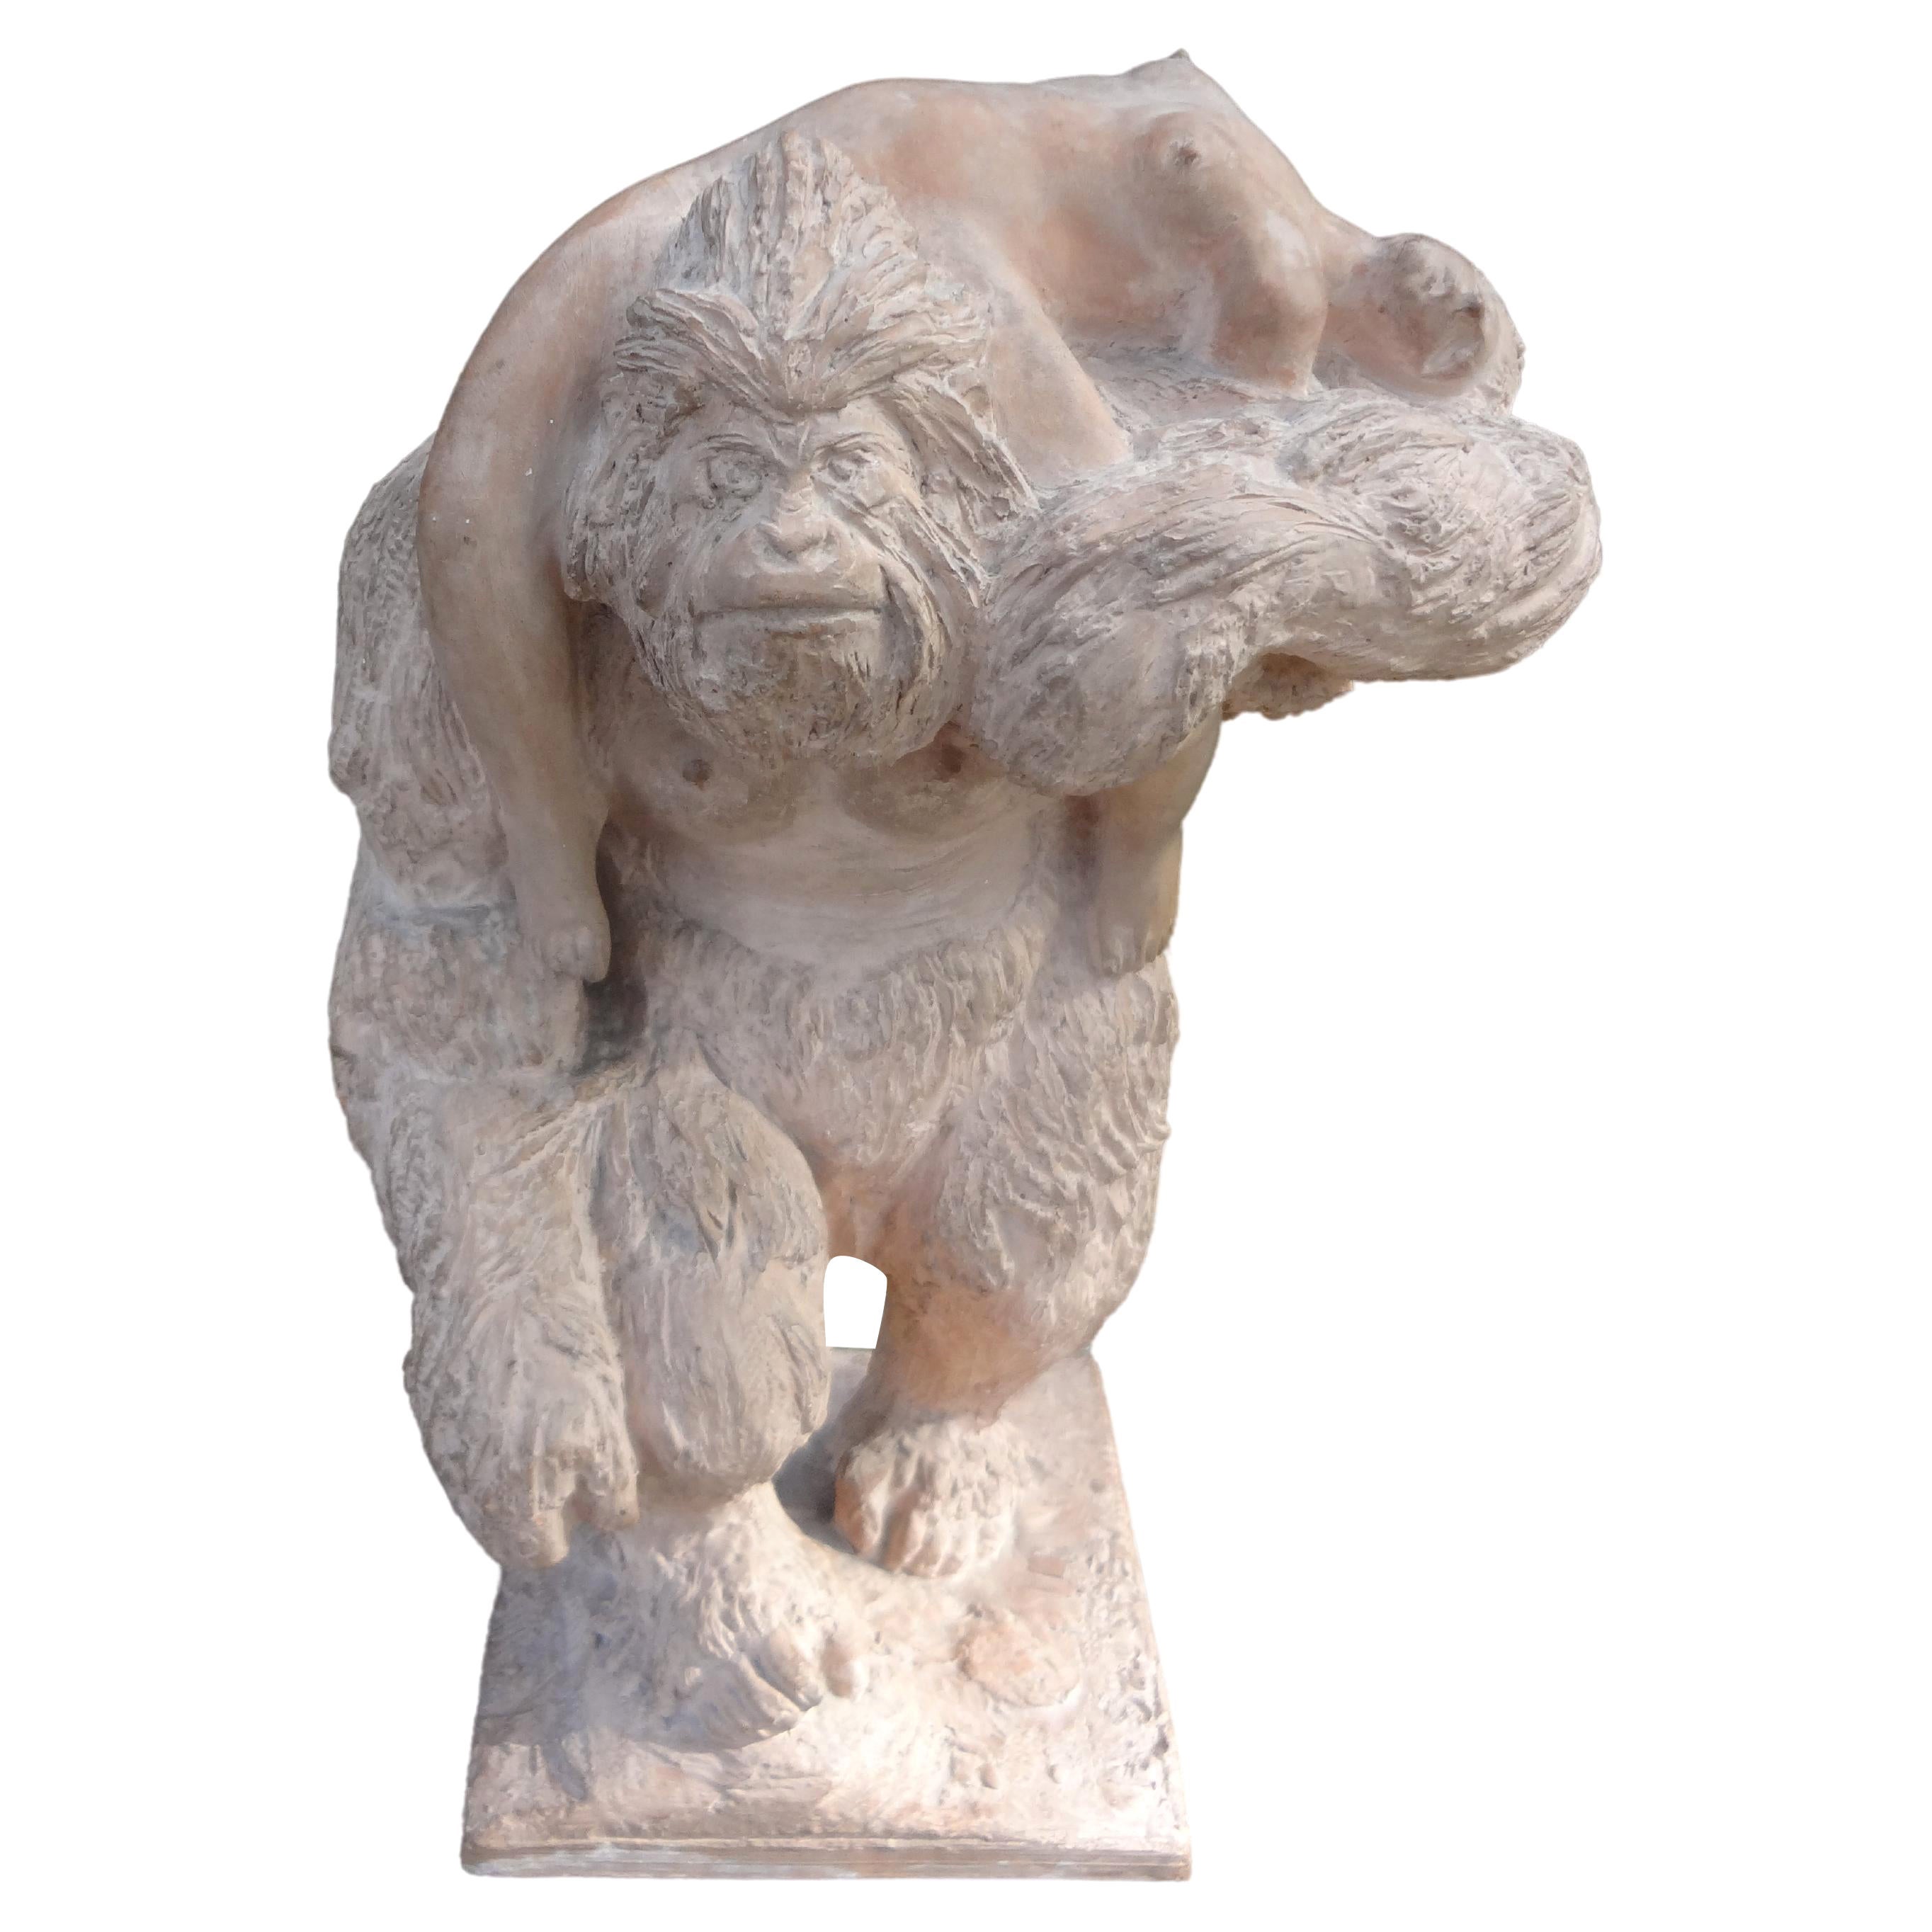 French Terracotta Sculpture Depicting King Kong